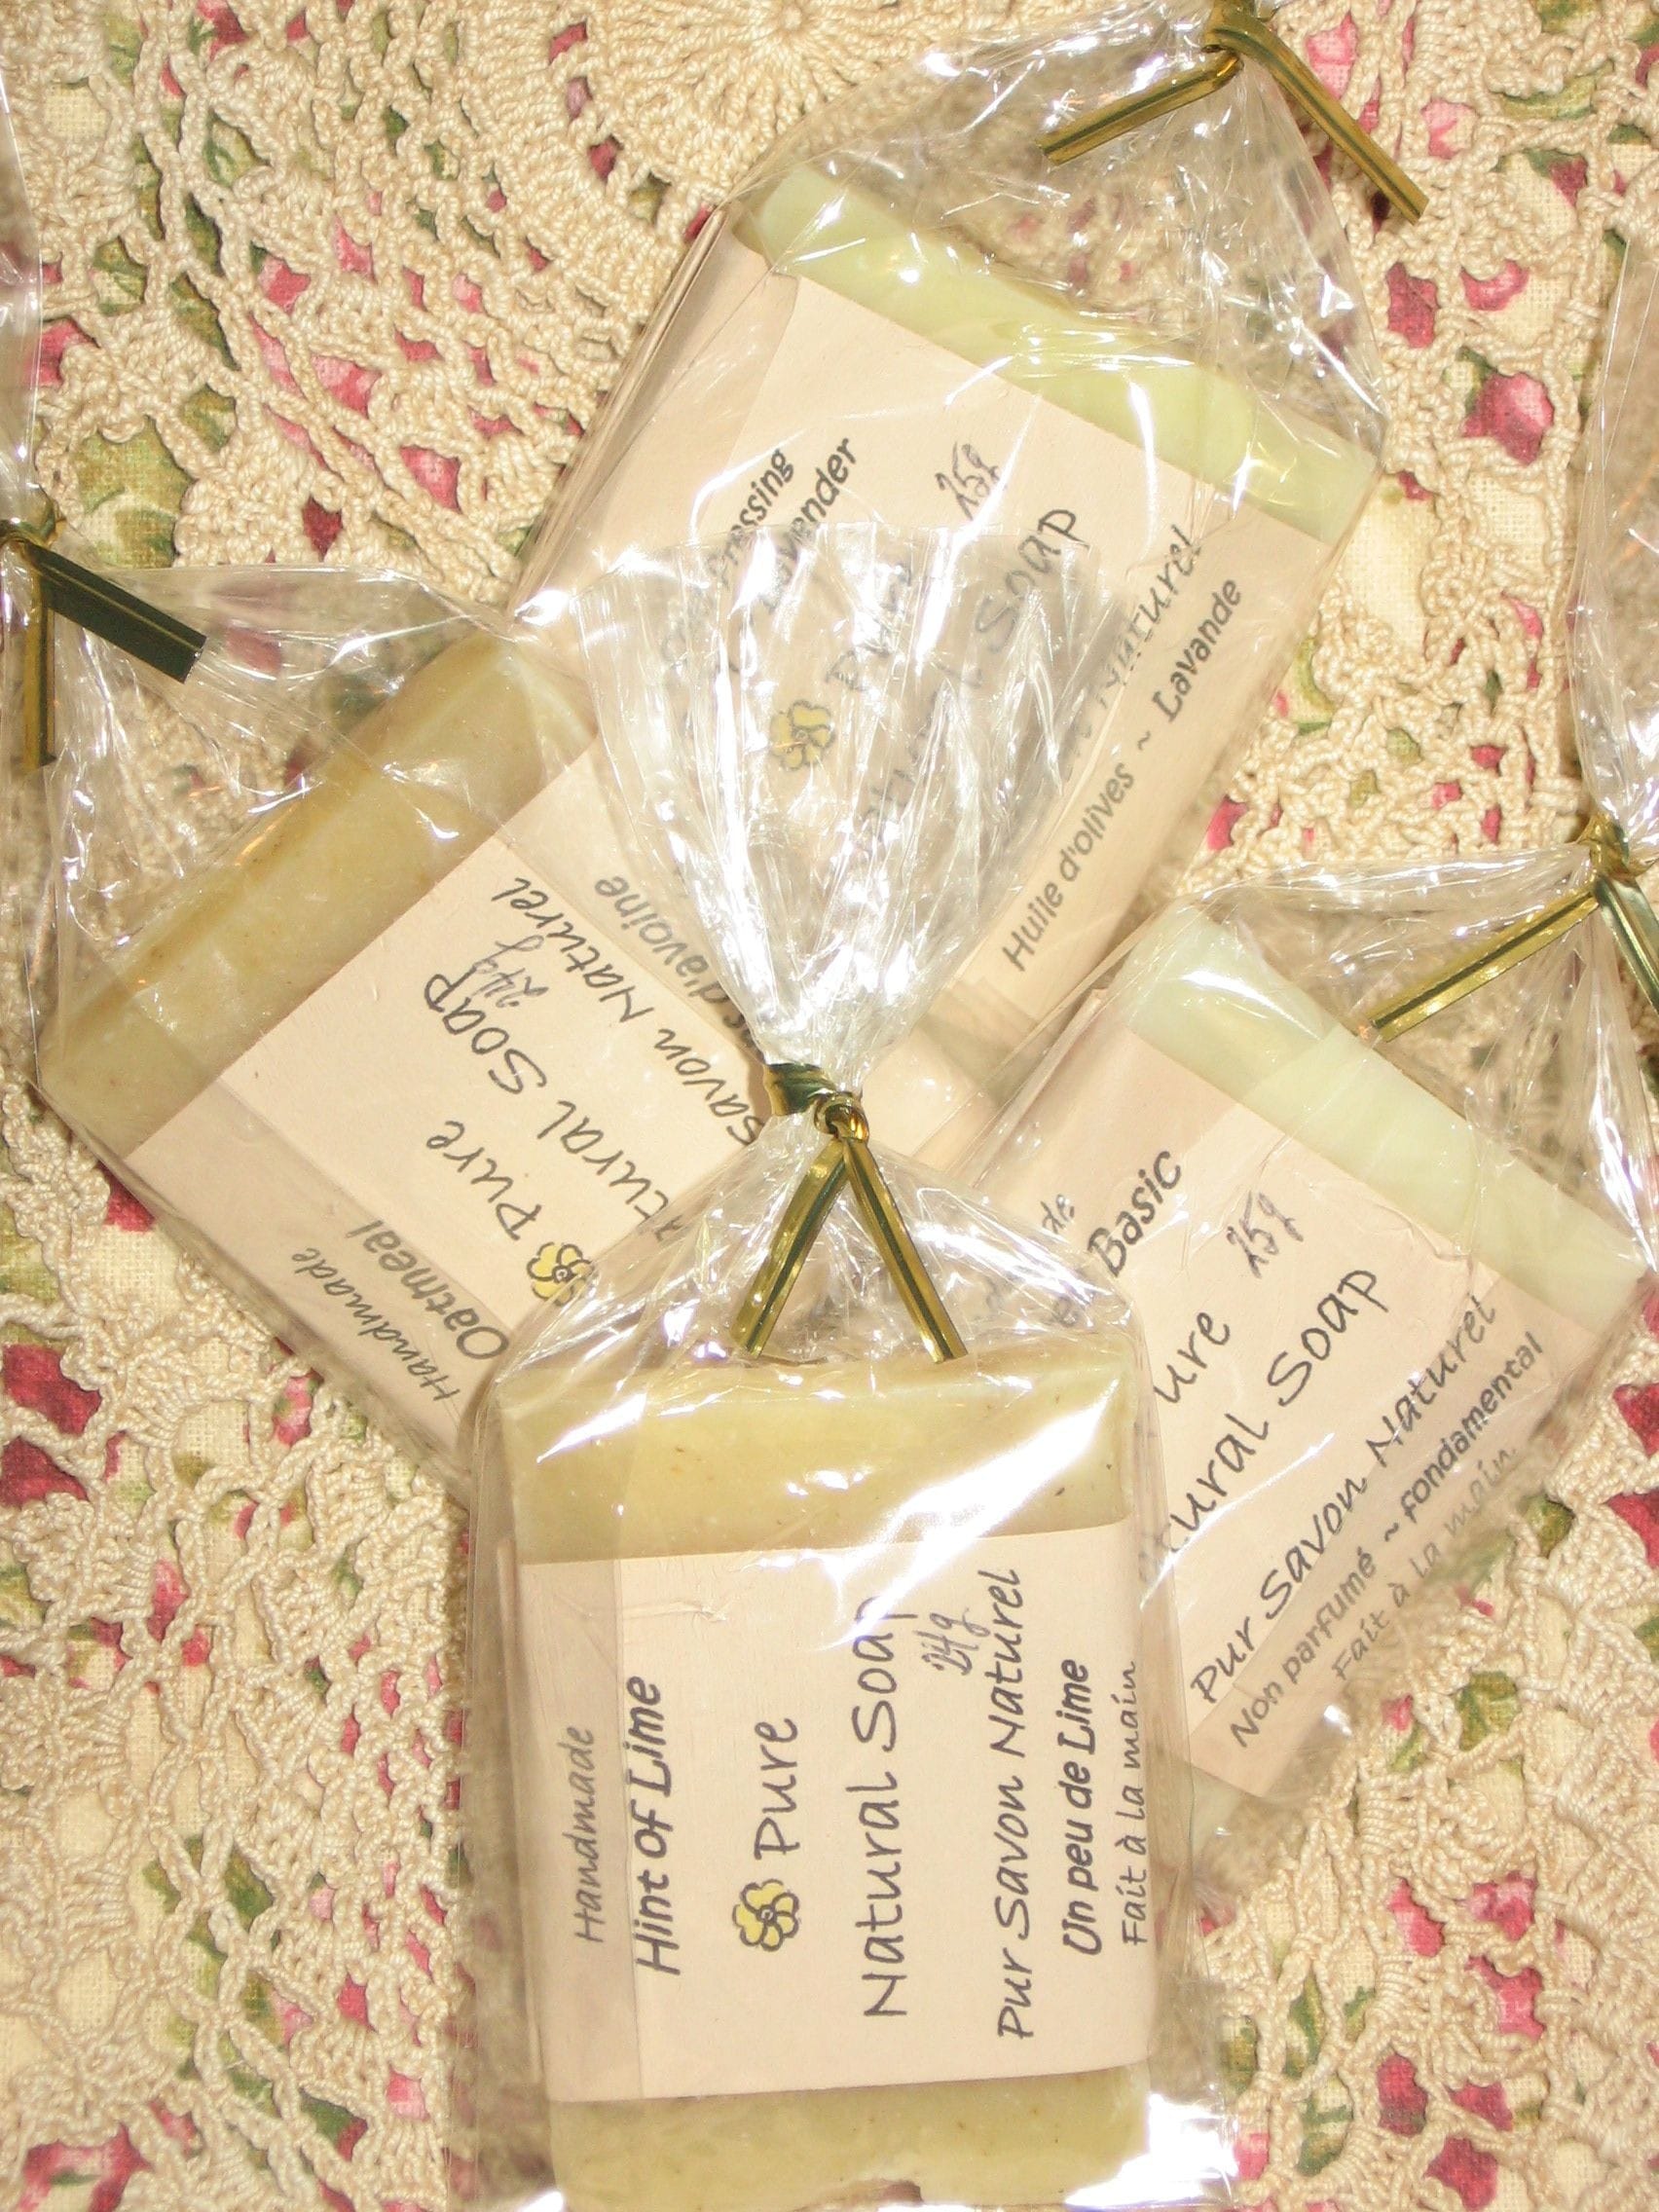 We are pleased to offer bulk soap favours at a very reasonable price including shipping cost.  Handmade basic pure natural soap favours for your guests. Vegan